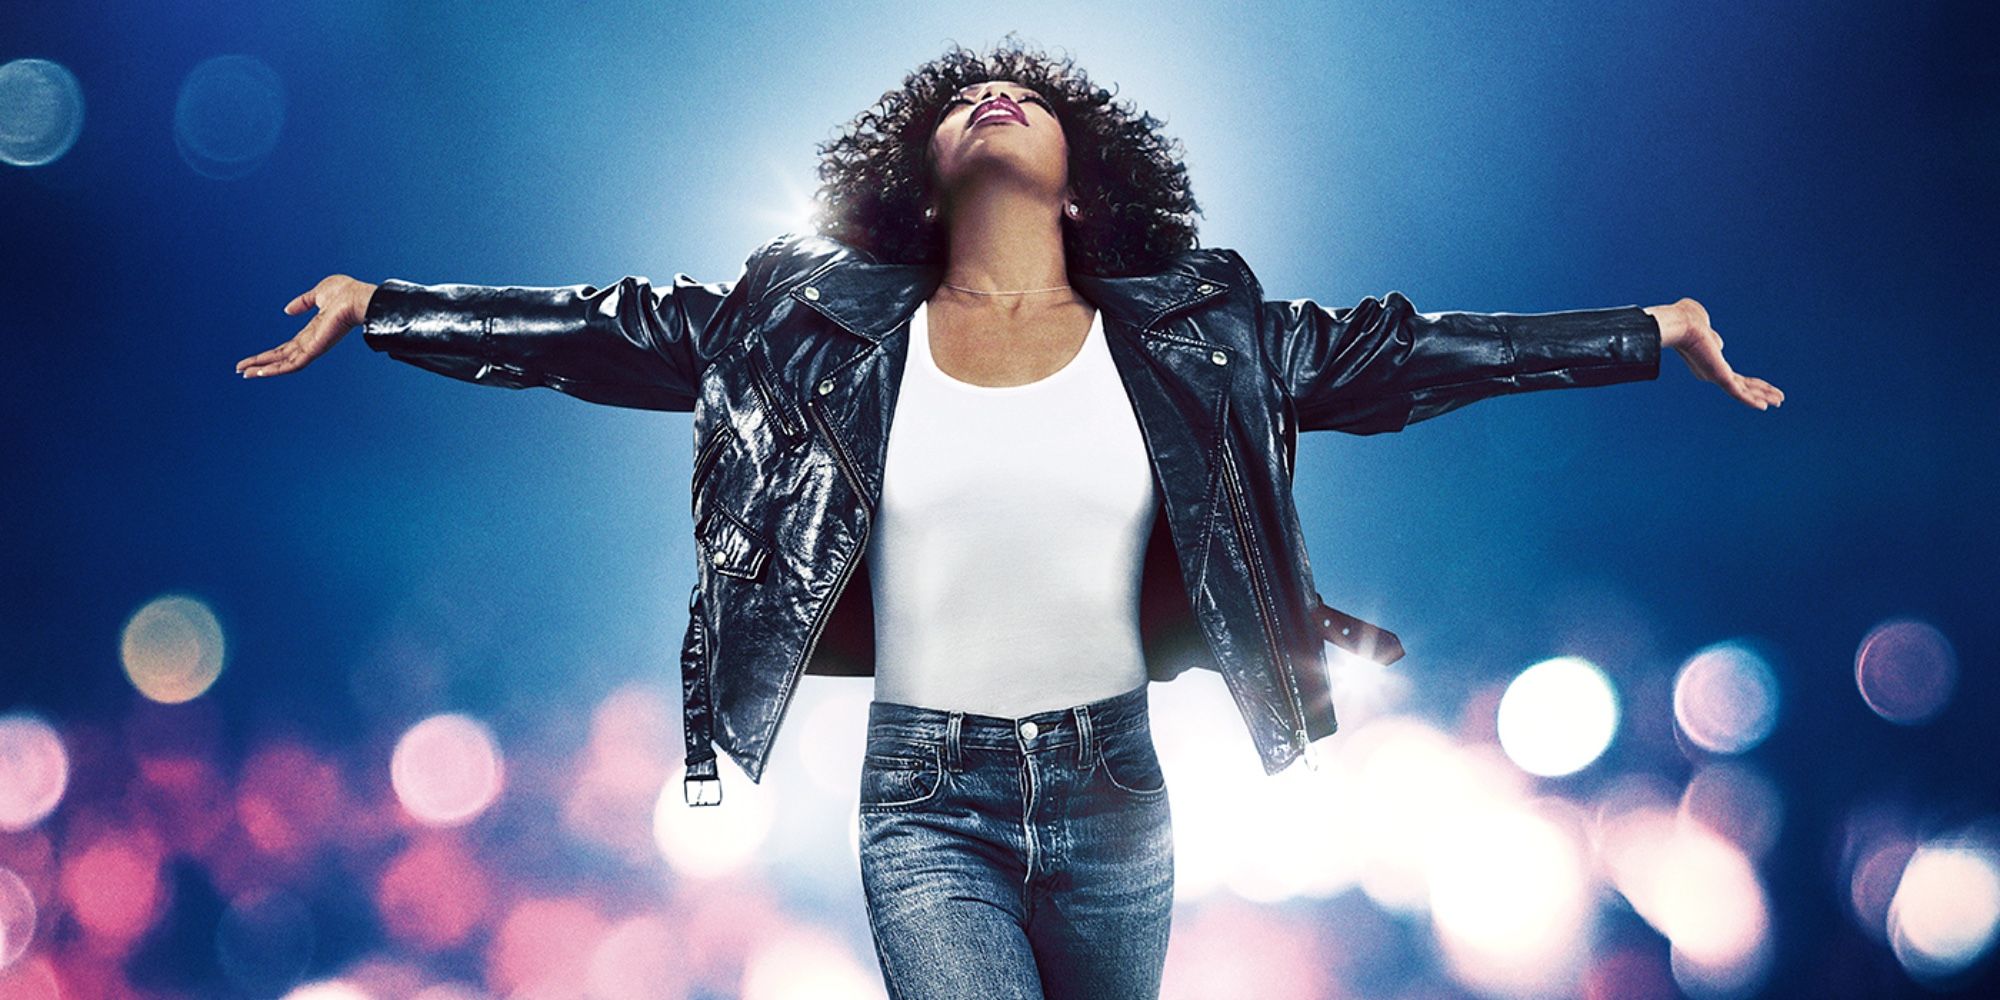 Whitney Houston spreading her arms and looking up in I Wanna Dance with Somebody.